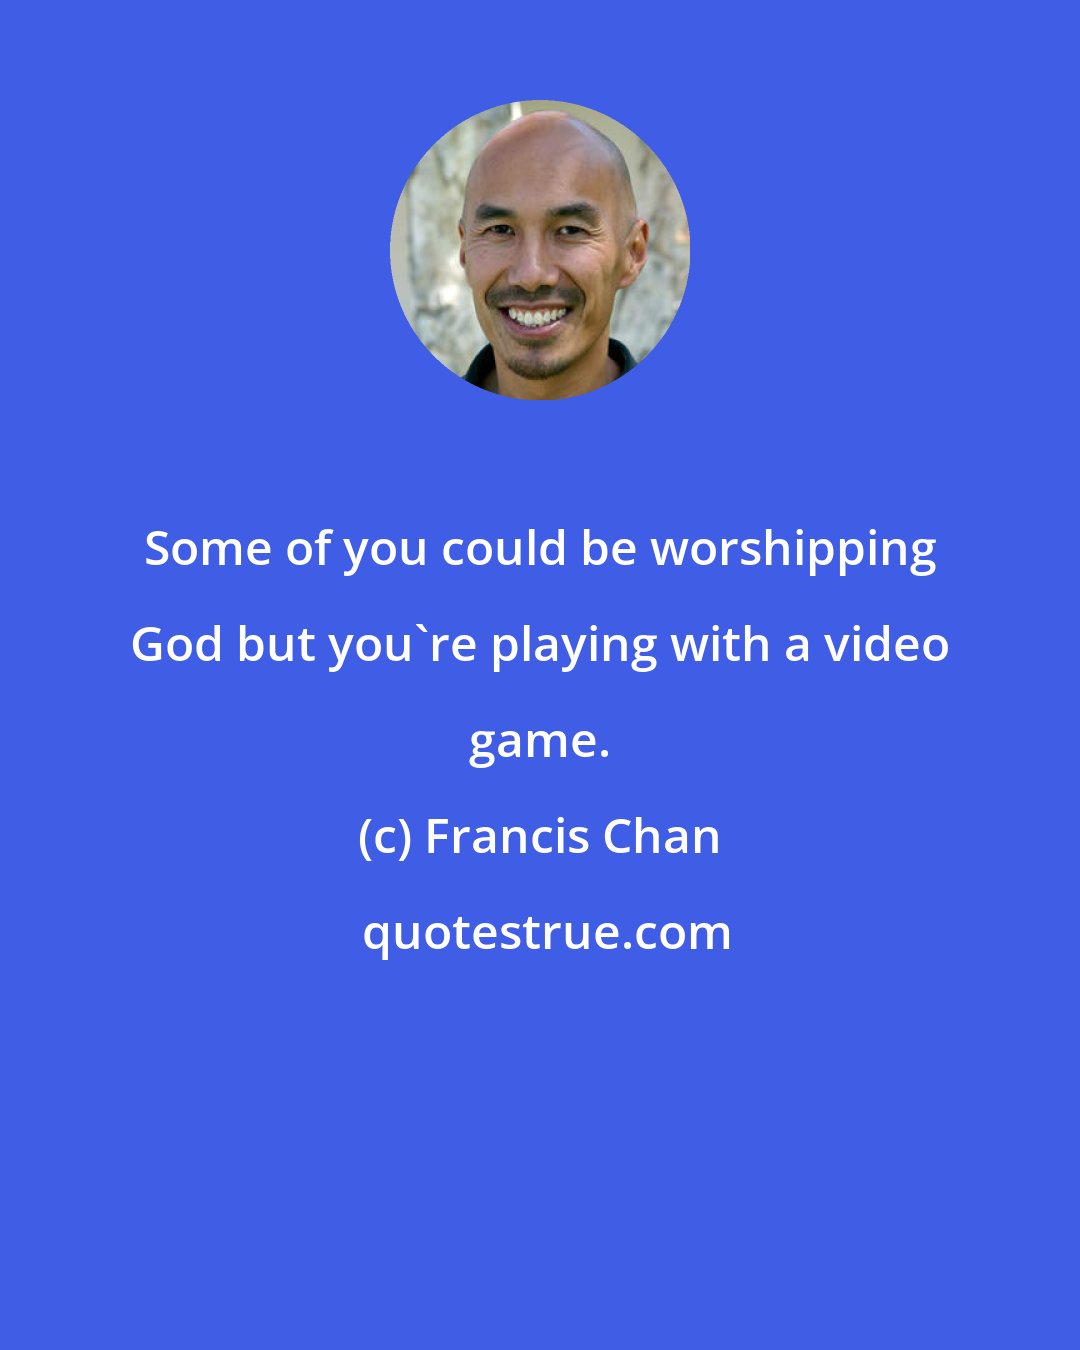 Francis Chan: Some of you could be worshipping God but you're playing with a video game.